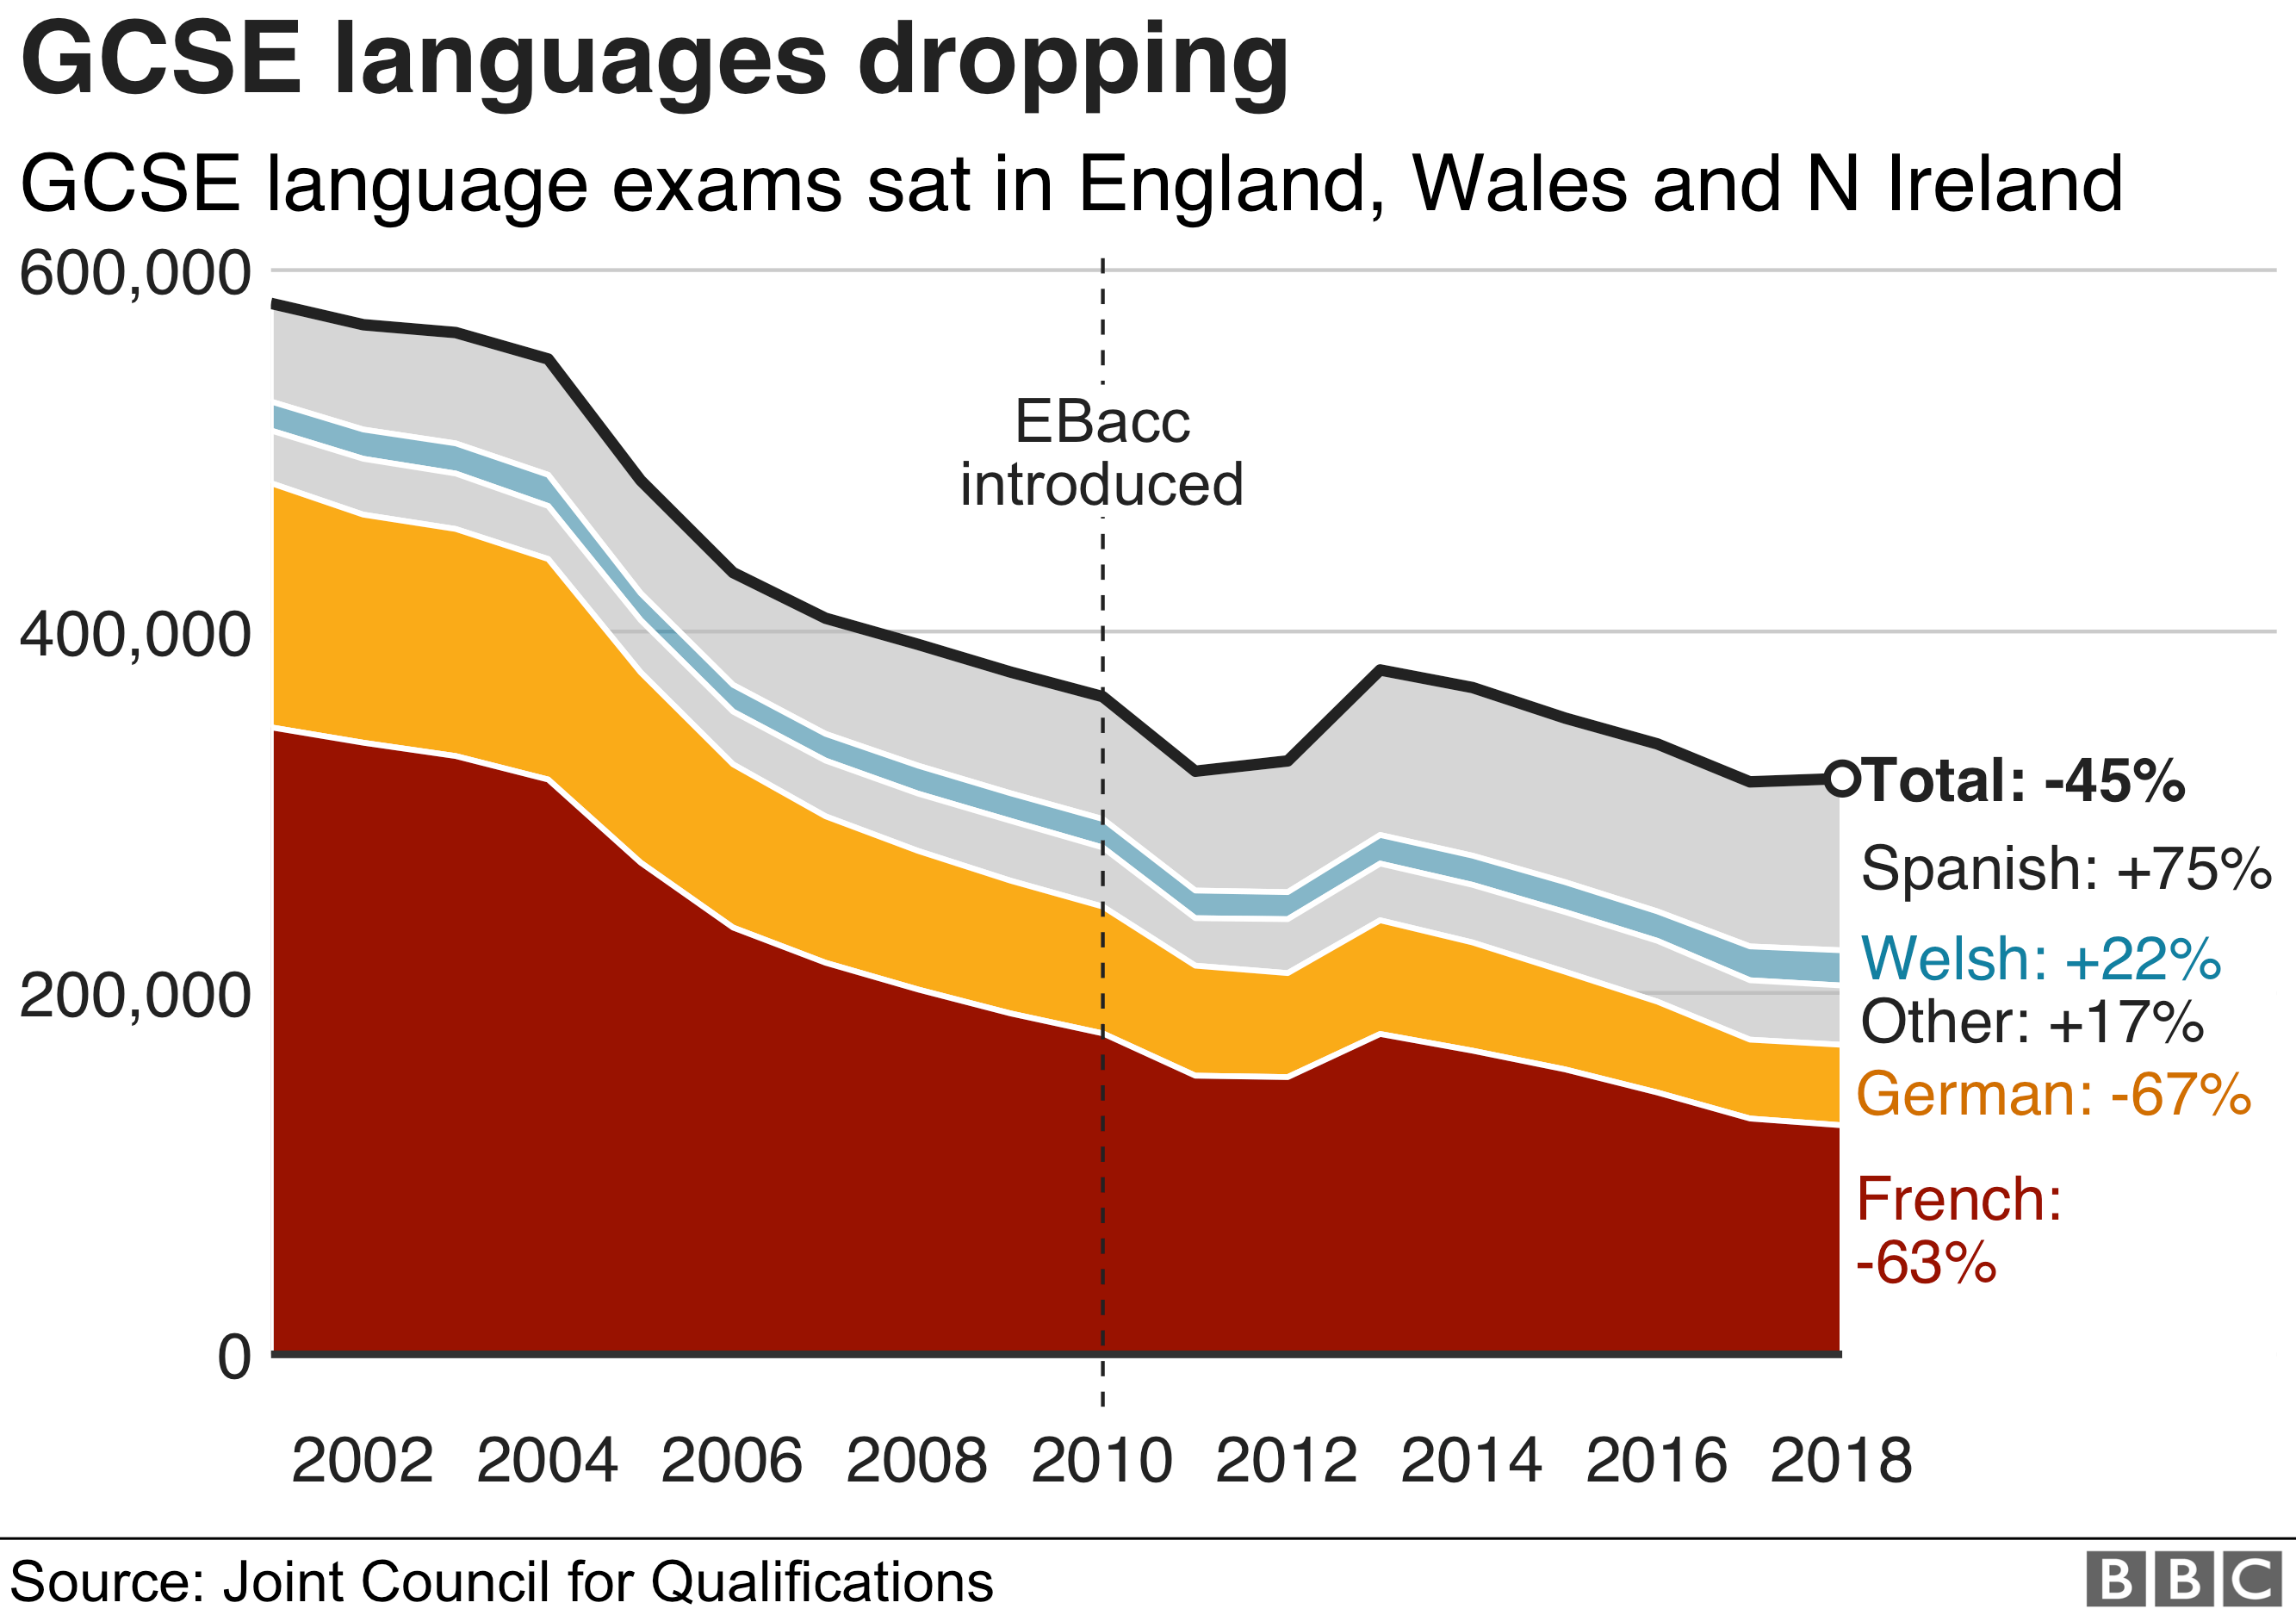 chart showing how GCSE languages are declining in England, Wales and Northern Ireland - total rate of 45% with German and French dropping most at 67% and 63%